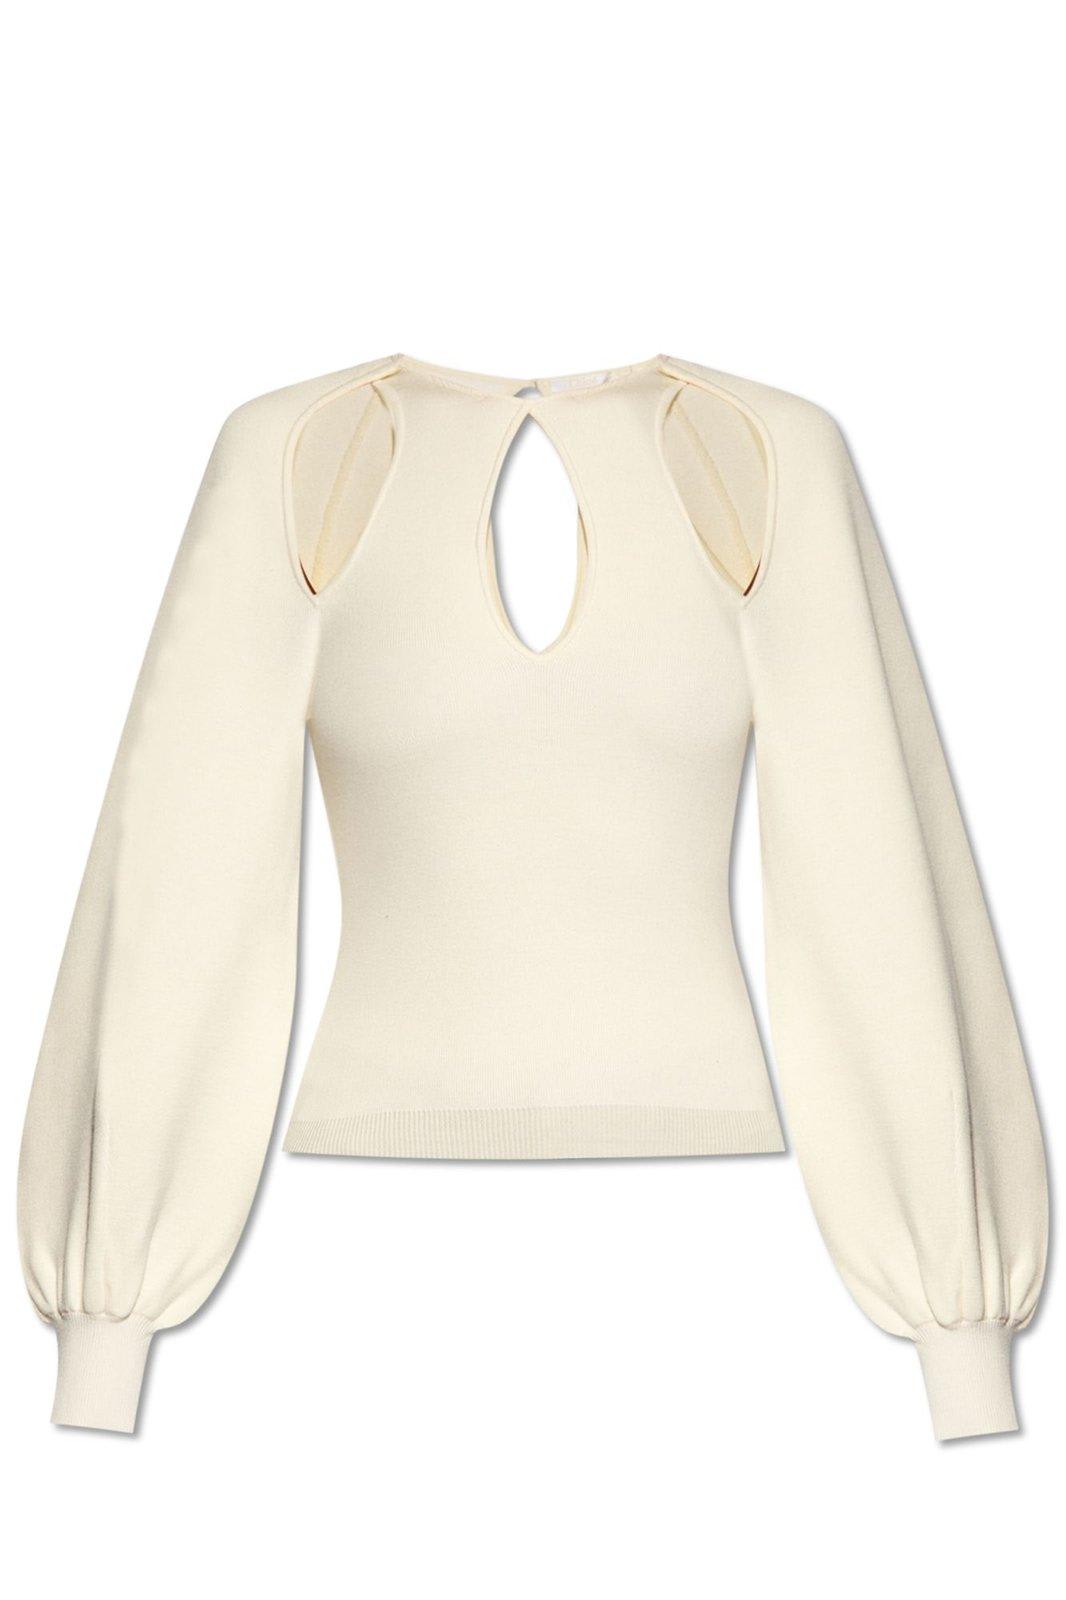 Chloé Puff-sleeved Cut-out Knit Top